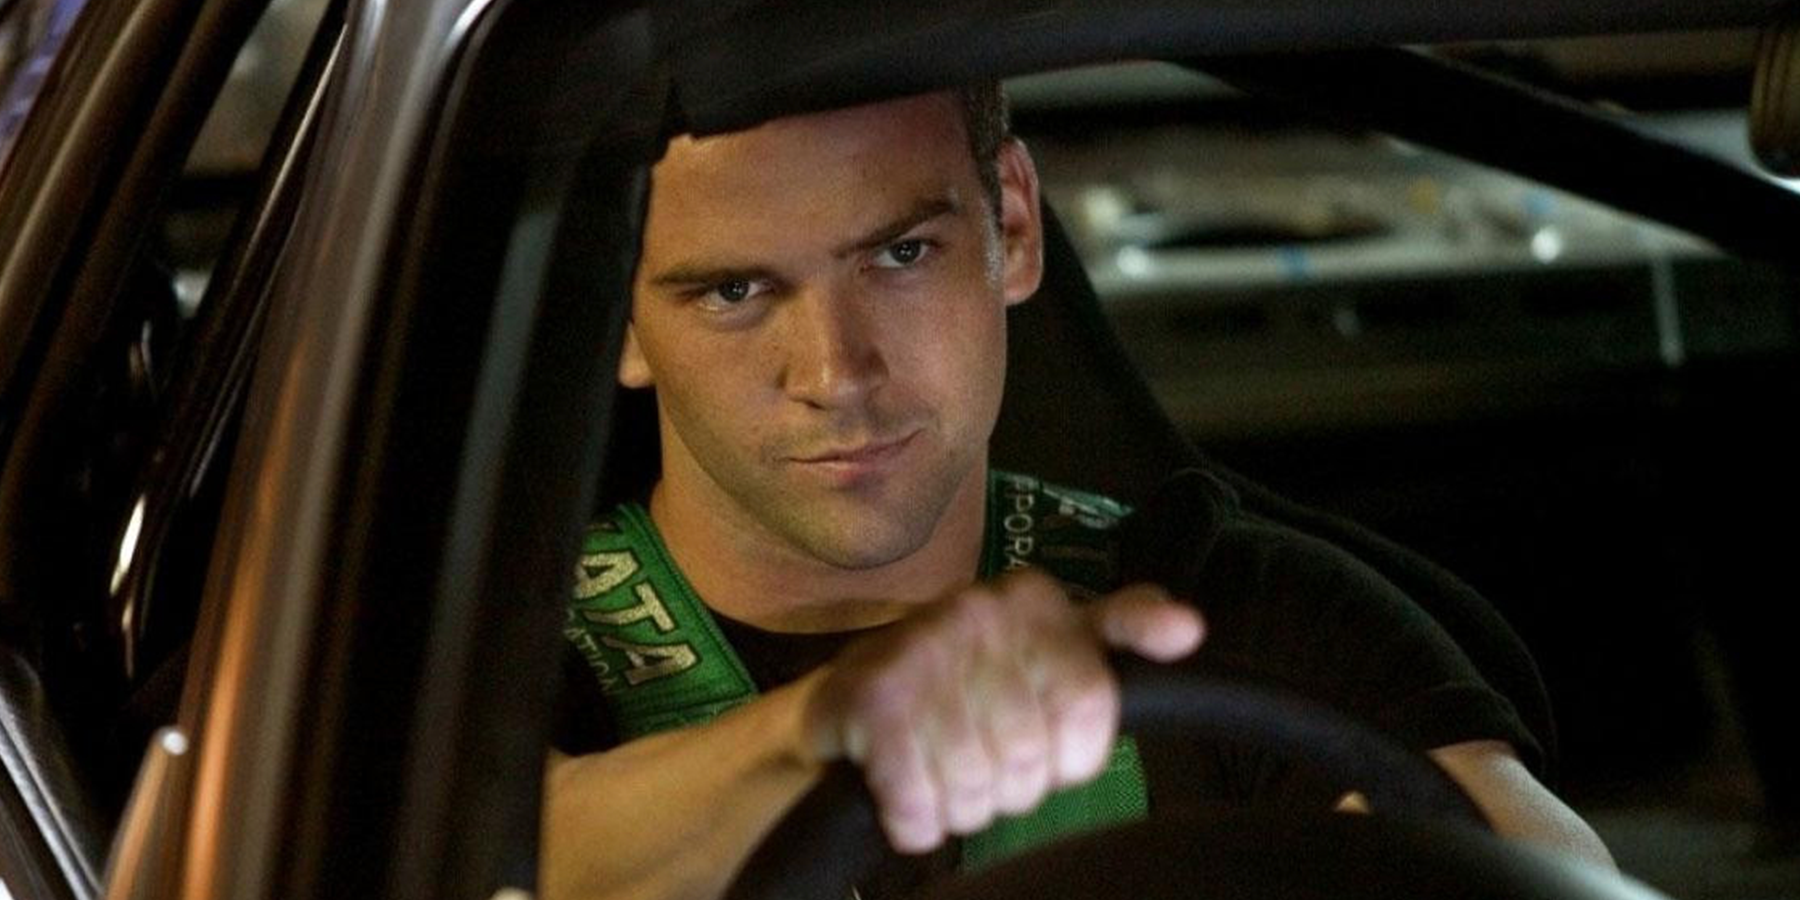 Sean sits behind the wheel in The Fast and the Furious: Tokyo Drift